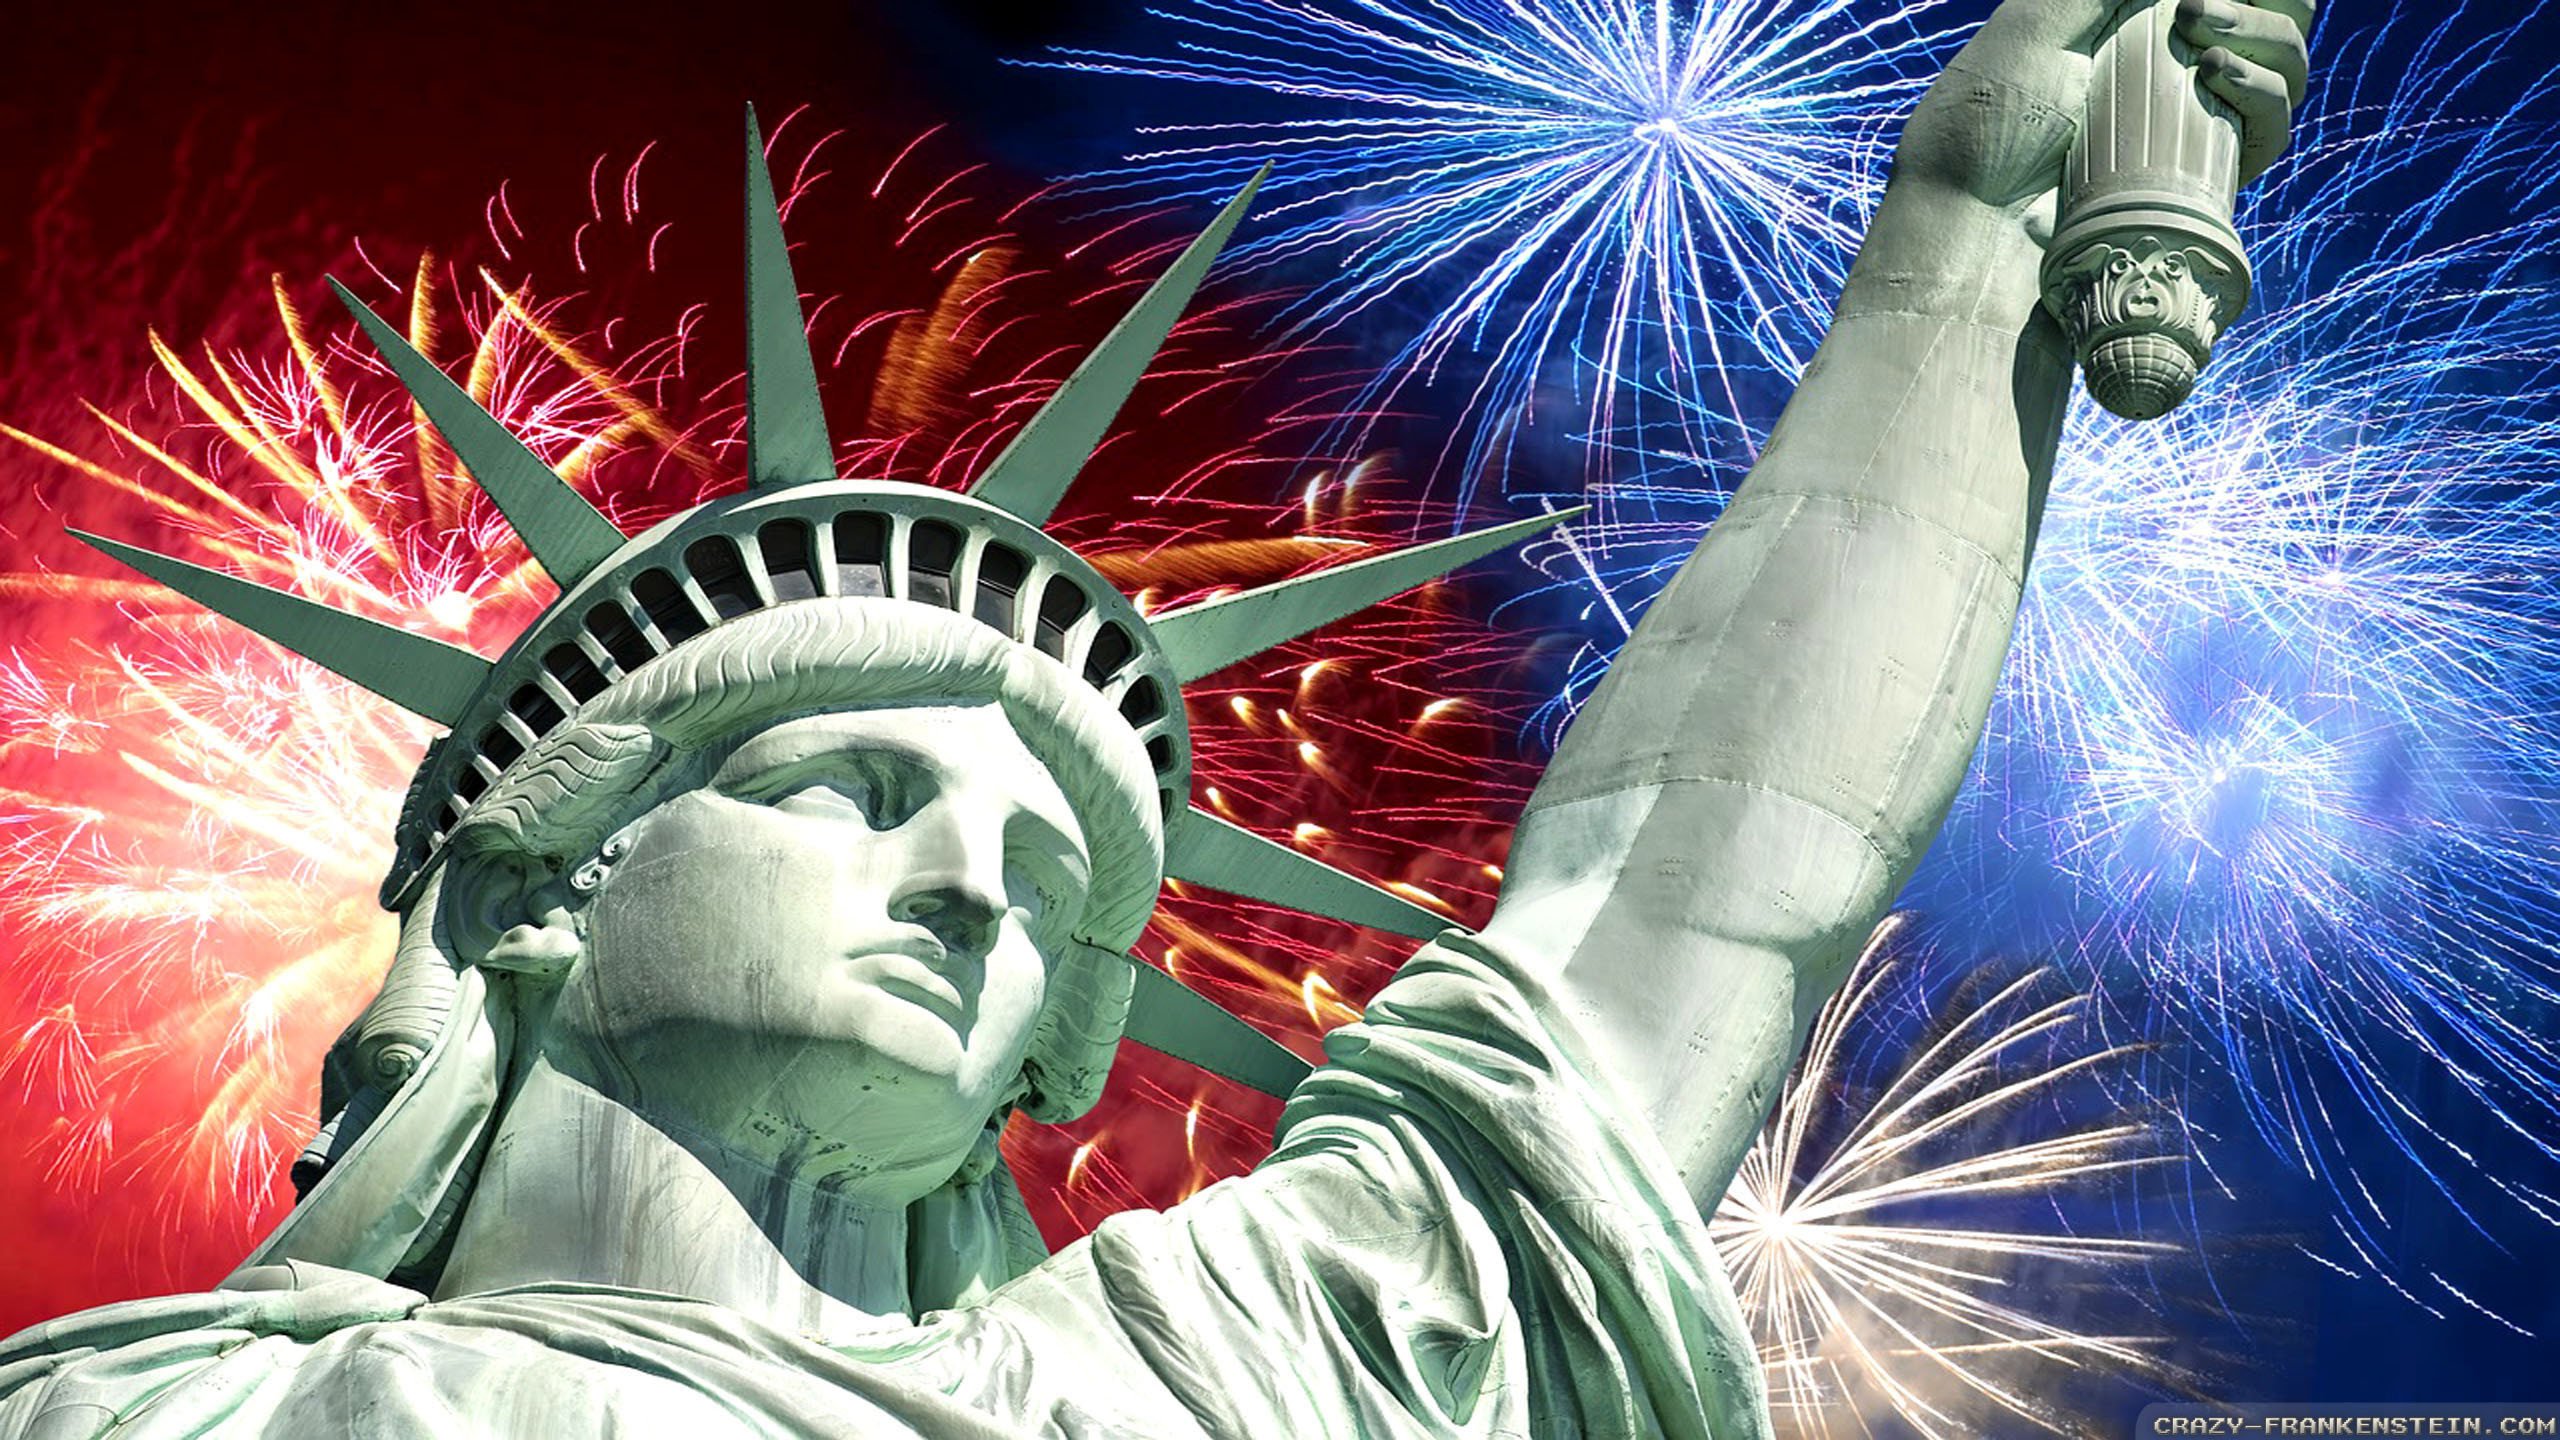 July 4th Fireworks wallpapers – Independence Day wallpapers – Crazy